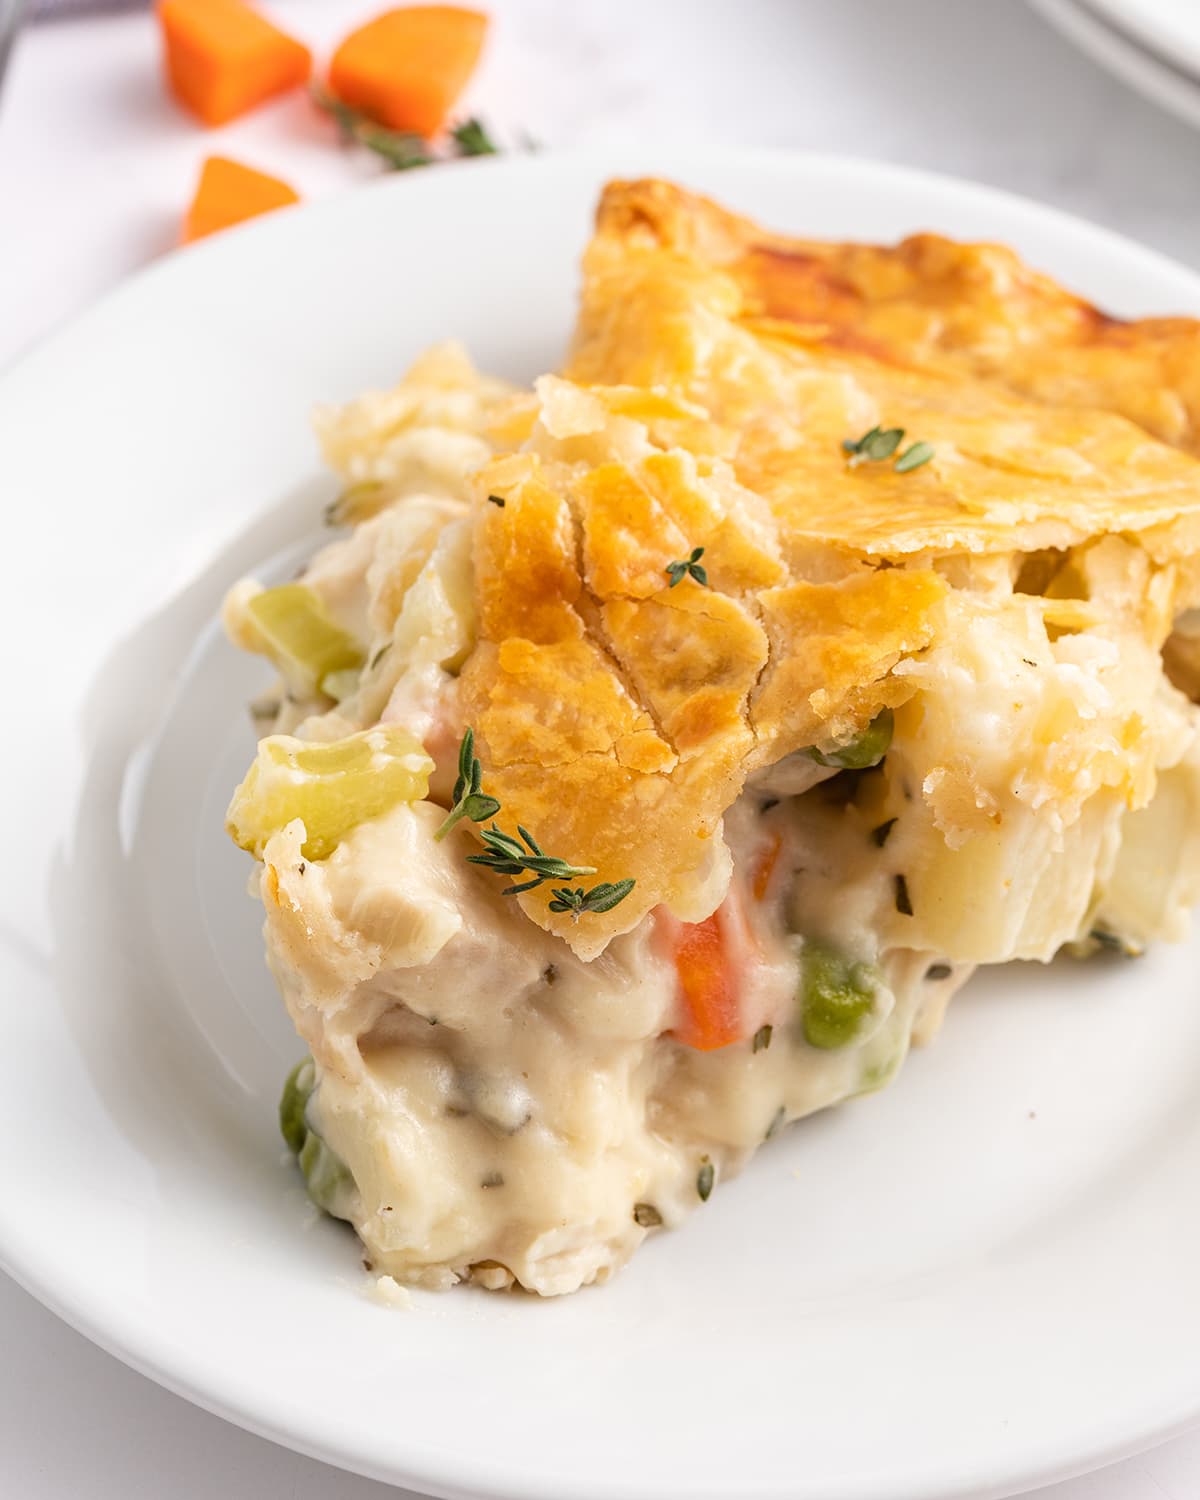 A close up photo of a slice of chicken pot pie.